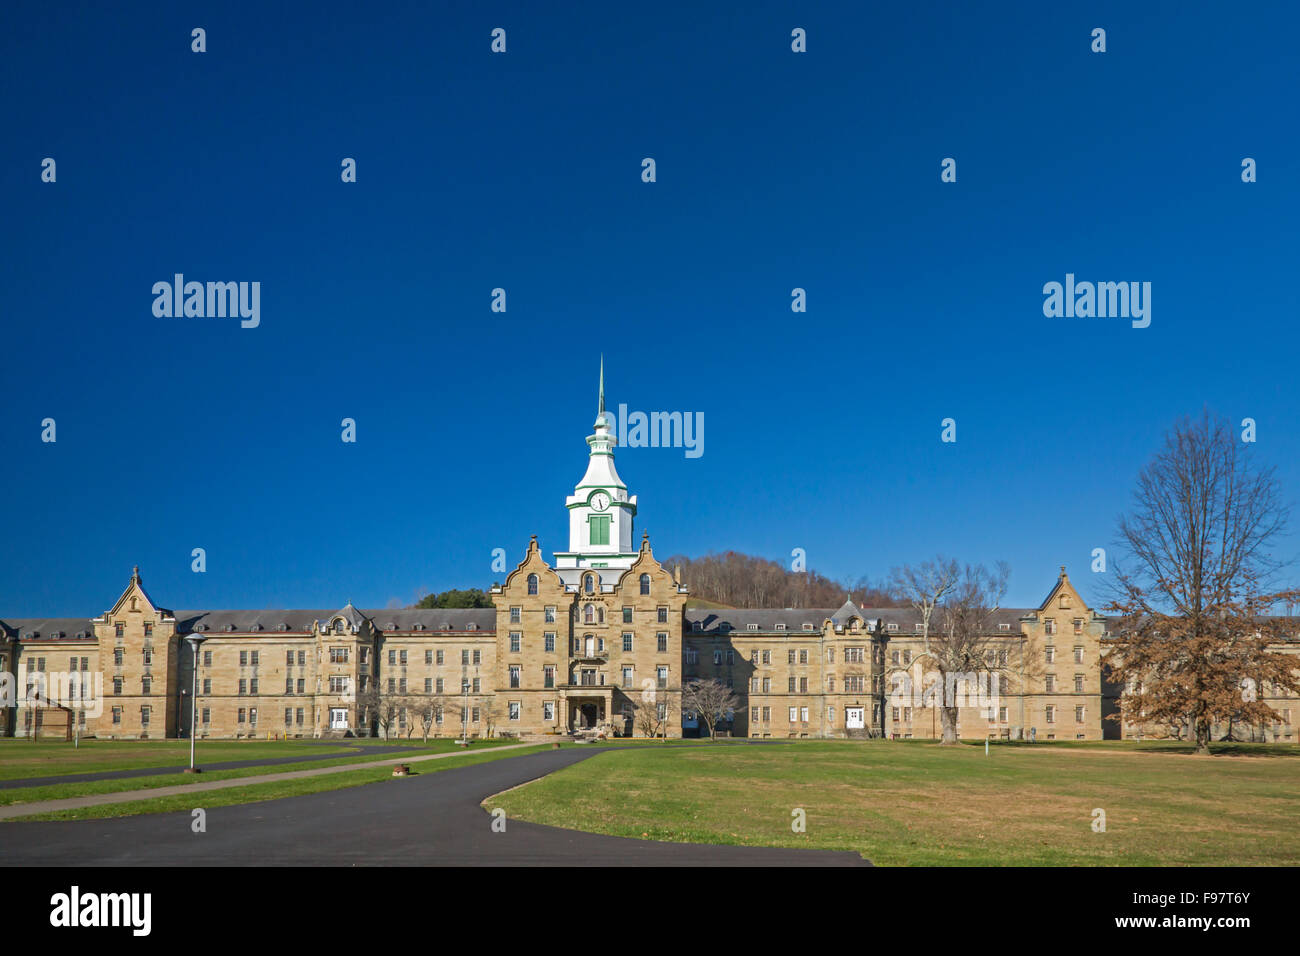 Weston, West Virginia - The Trans-Allegheny Lunatic Asylum, later known as the Weston State Hospital. Stock Photo